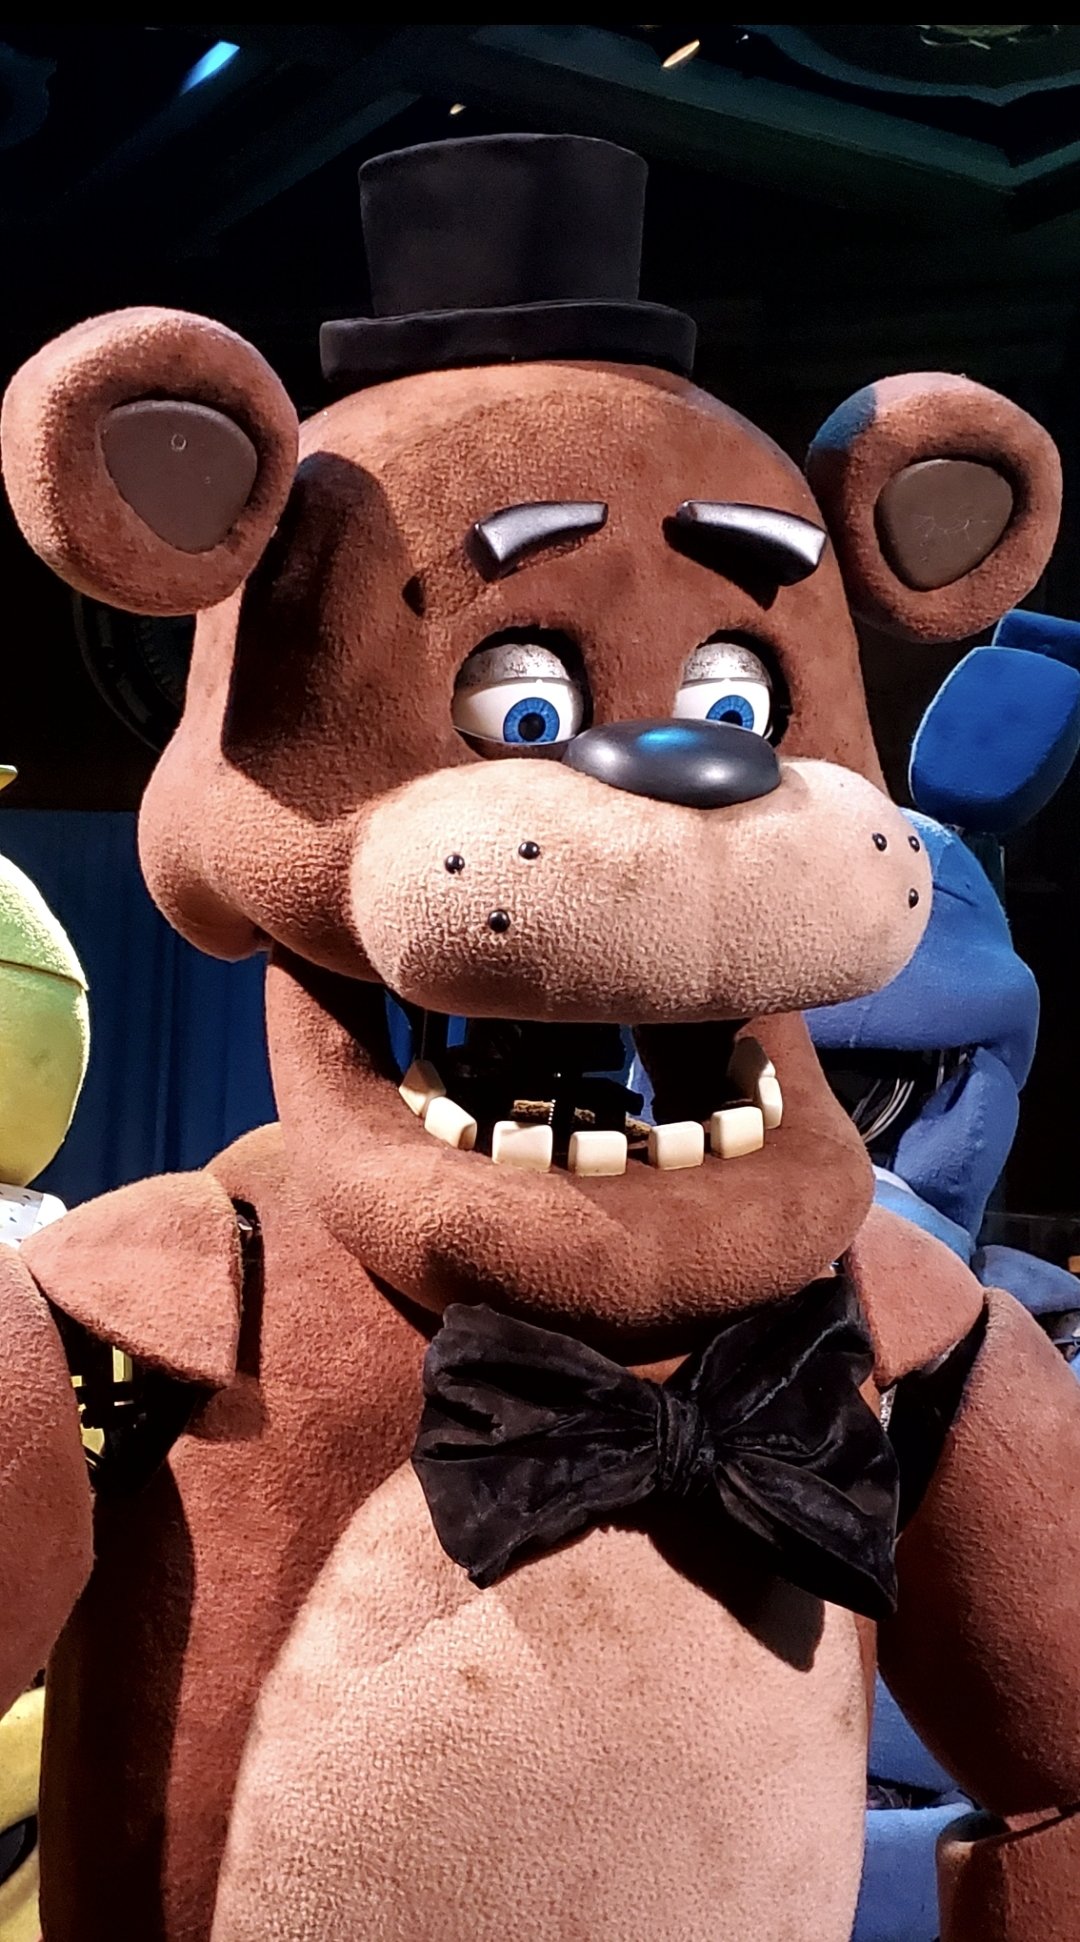 DiscussingFilm on X: A closer look at the Freddy Fazbear